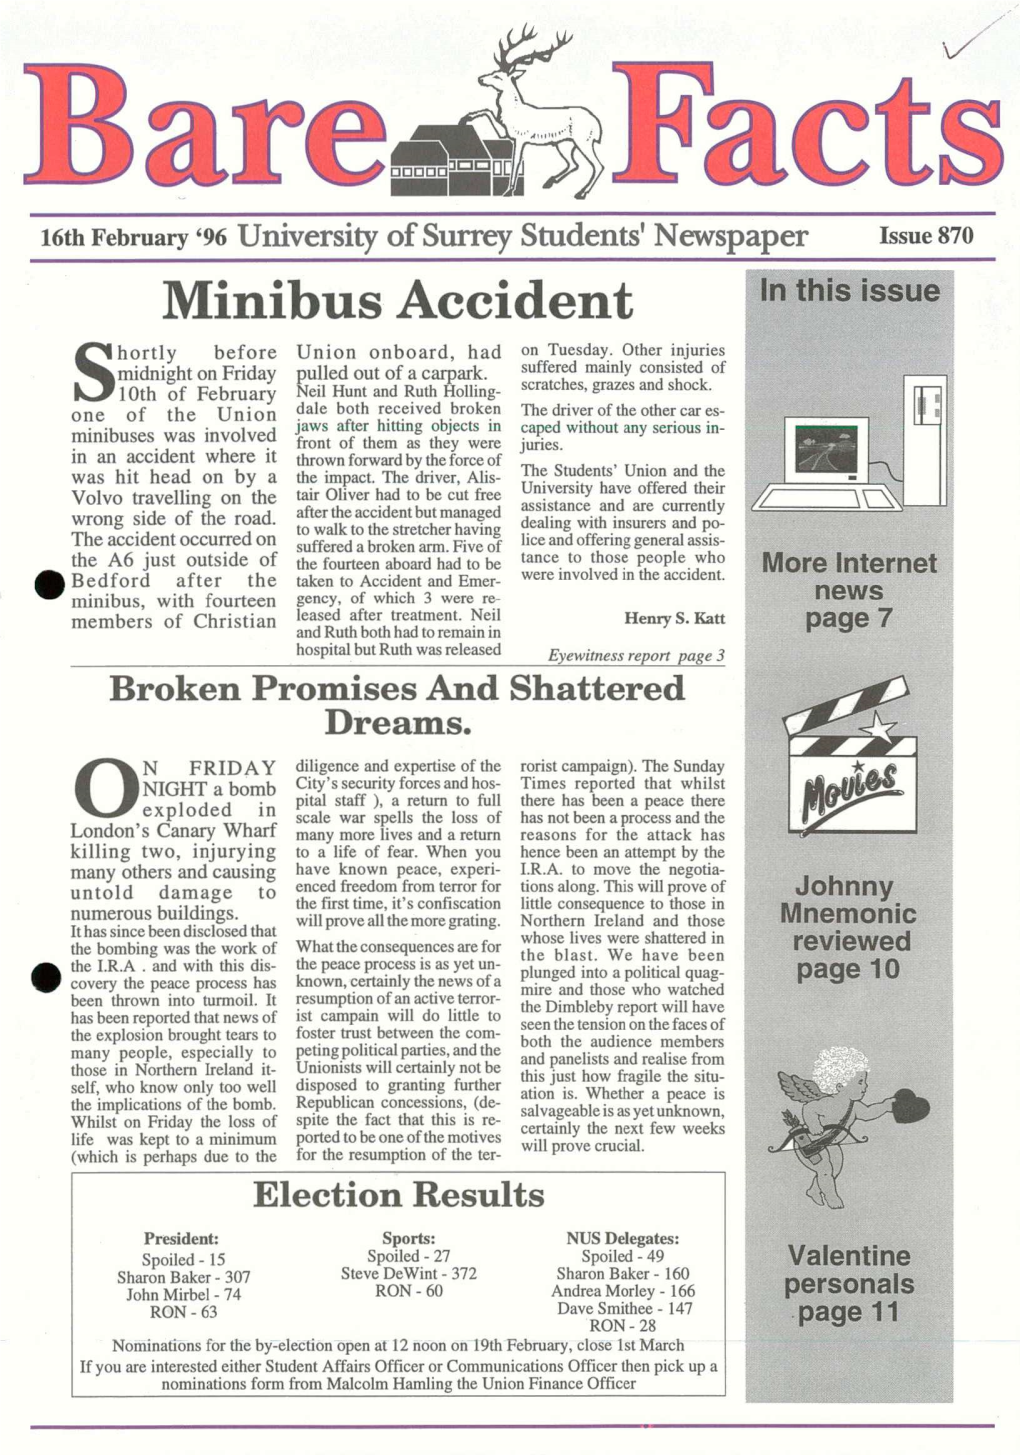 Minibus Accident in This Issue Hortly Before Union Onboard, Had on Tuesday